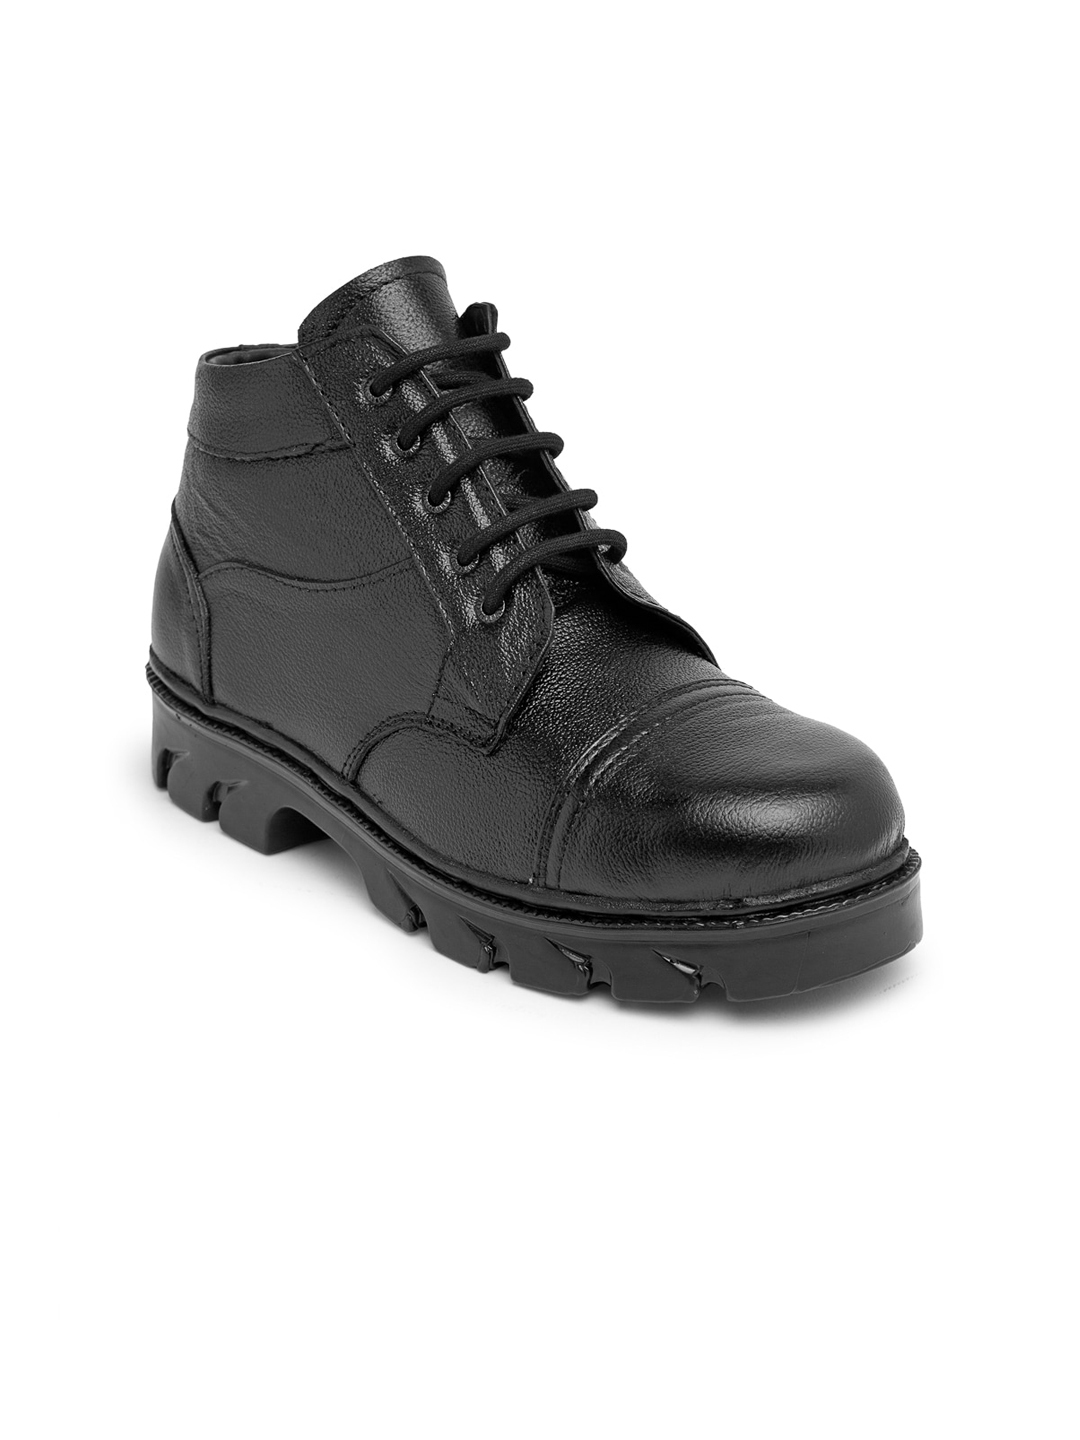 Buy Teakwood Leathers Men Black Leather Mid Top Flat Boots - Casual